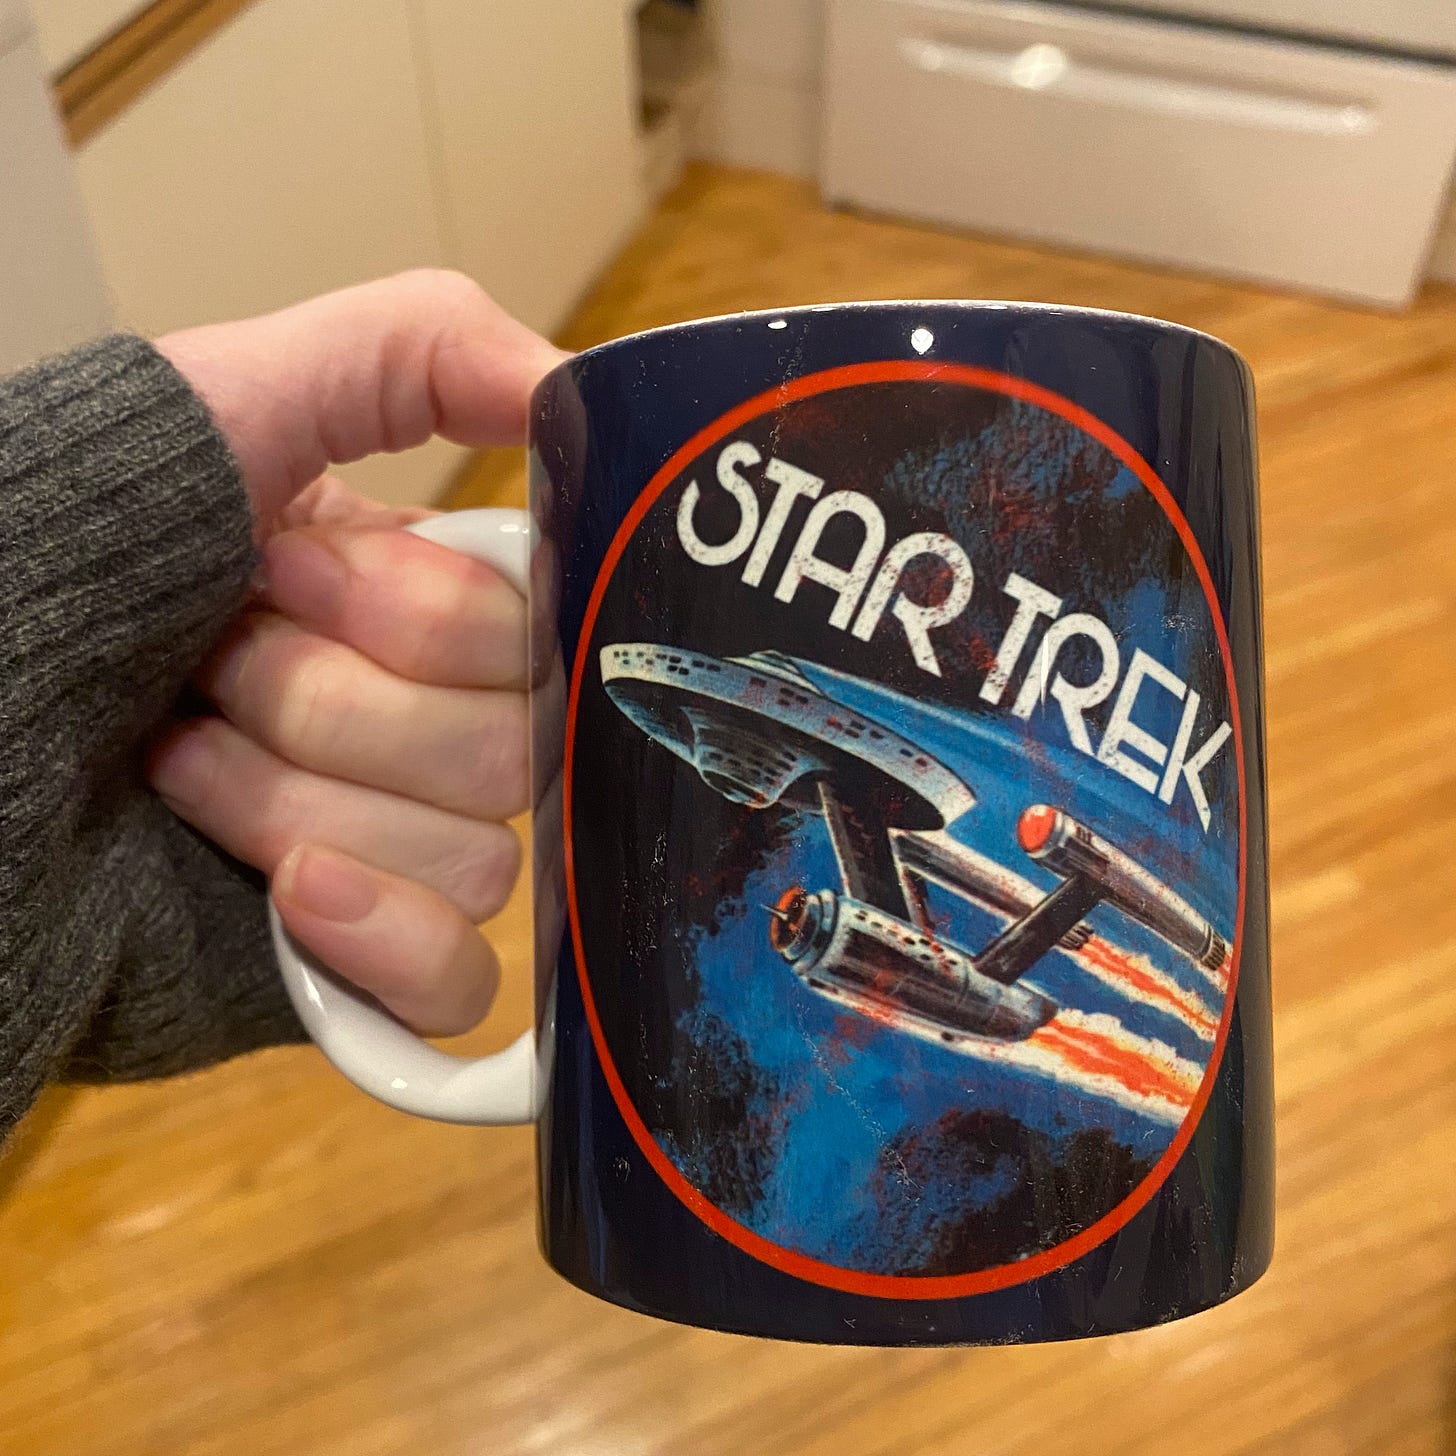 My hand, partially covered by a grey sweater, holding a blue mug with retro art of the Enterprise on it, and the Star Trek logo inside a red oval.